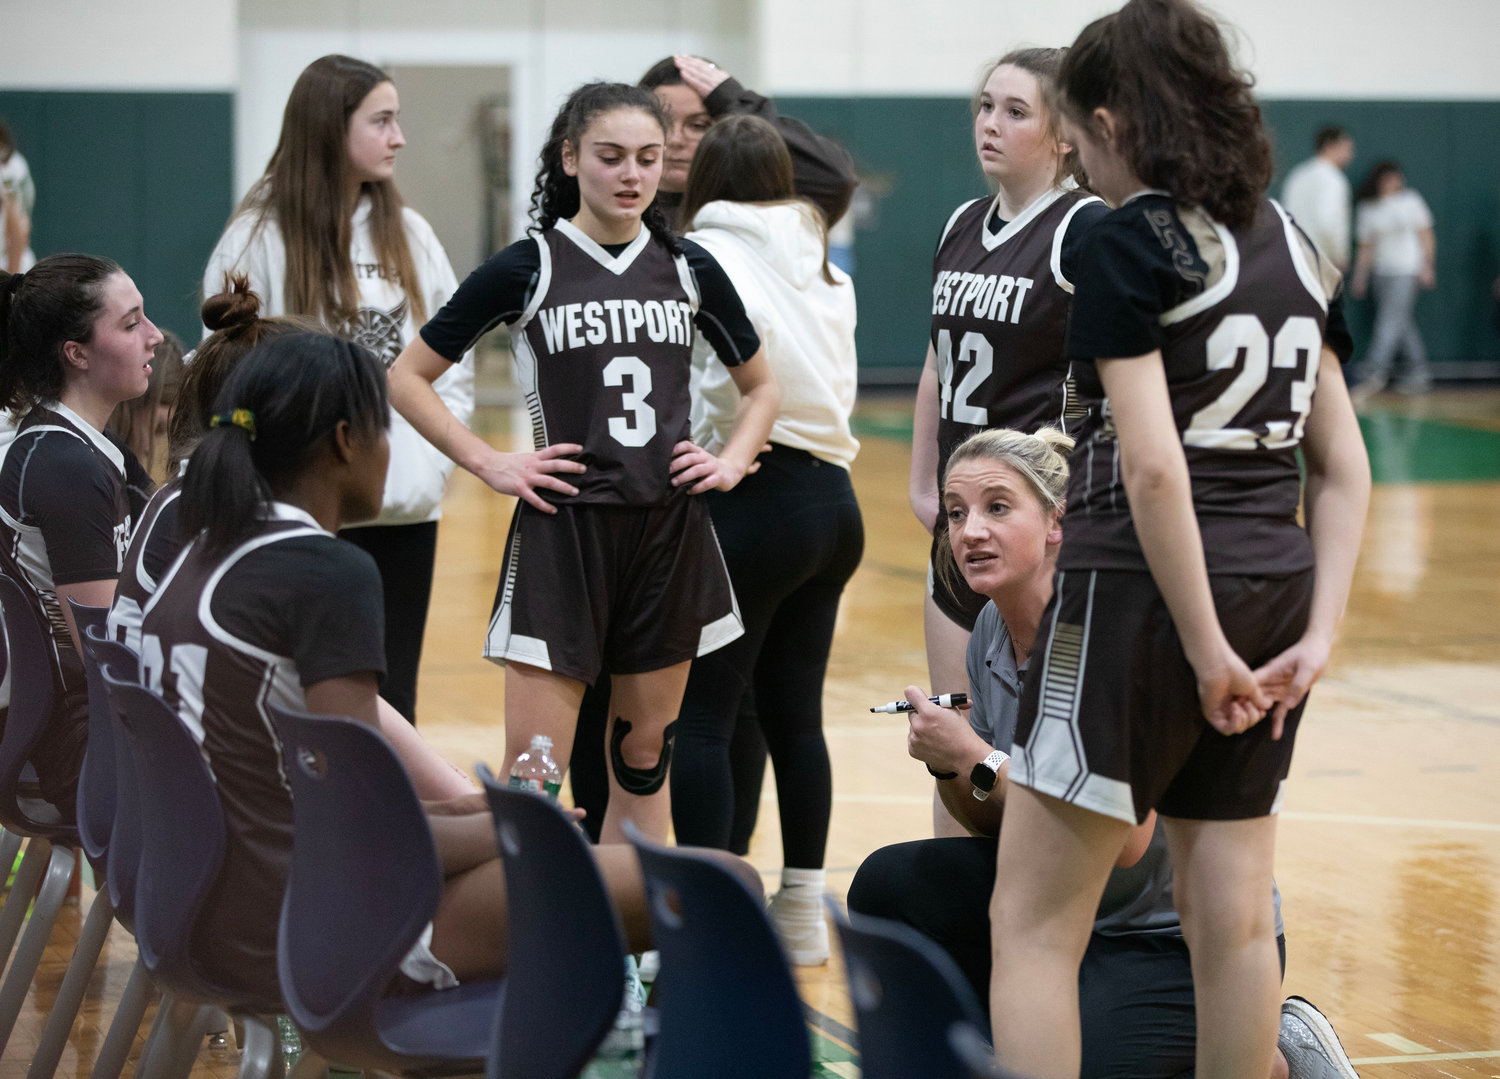 Head coach Jen Gargiulo speaks to the Wildcats between quarters during their Elite 8 game at Sutton High School on Friday night.